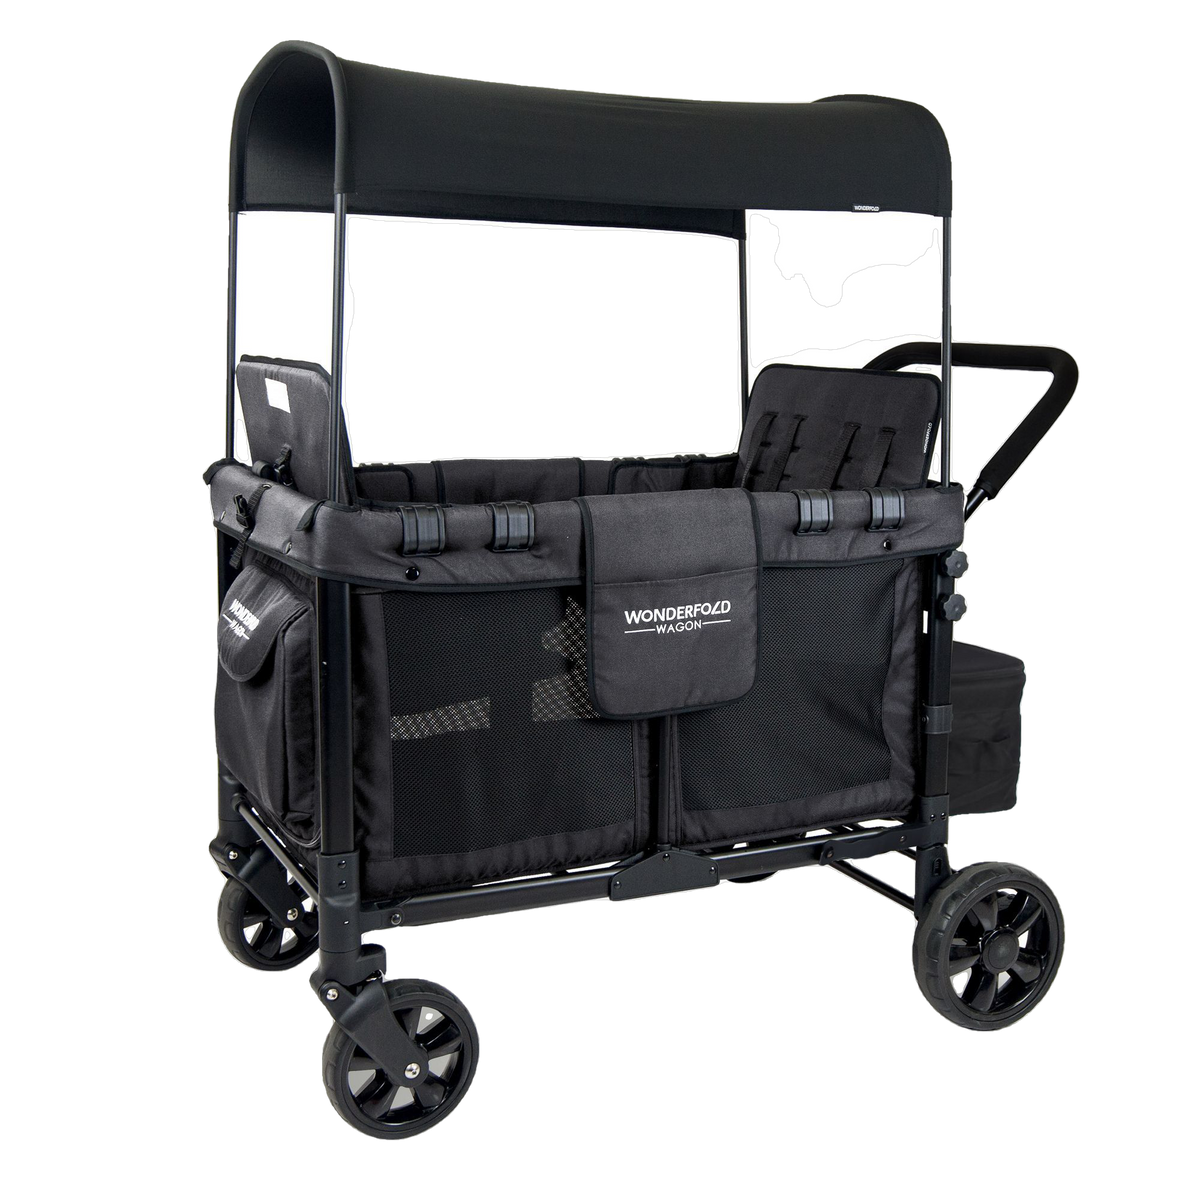 WonderFold Baby W4 Multi-Function Folding Quad Stroller Wagon with Removable Canopy and Seats Gray & Black New